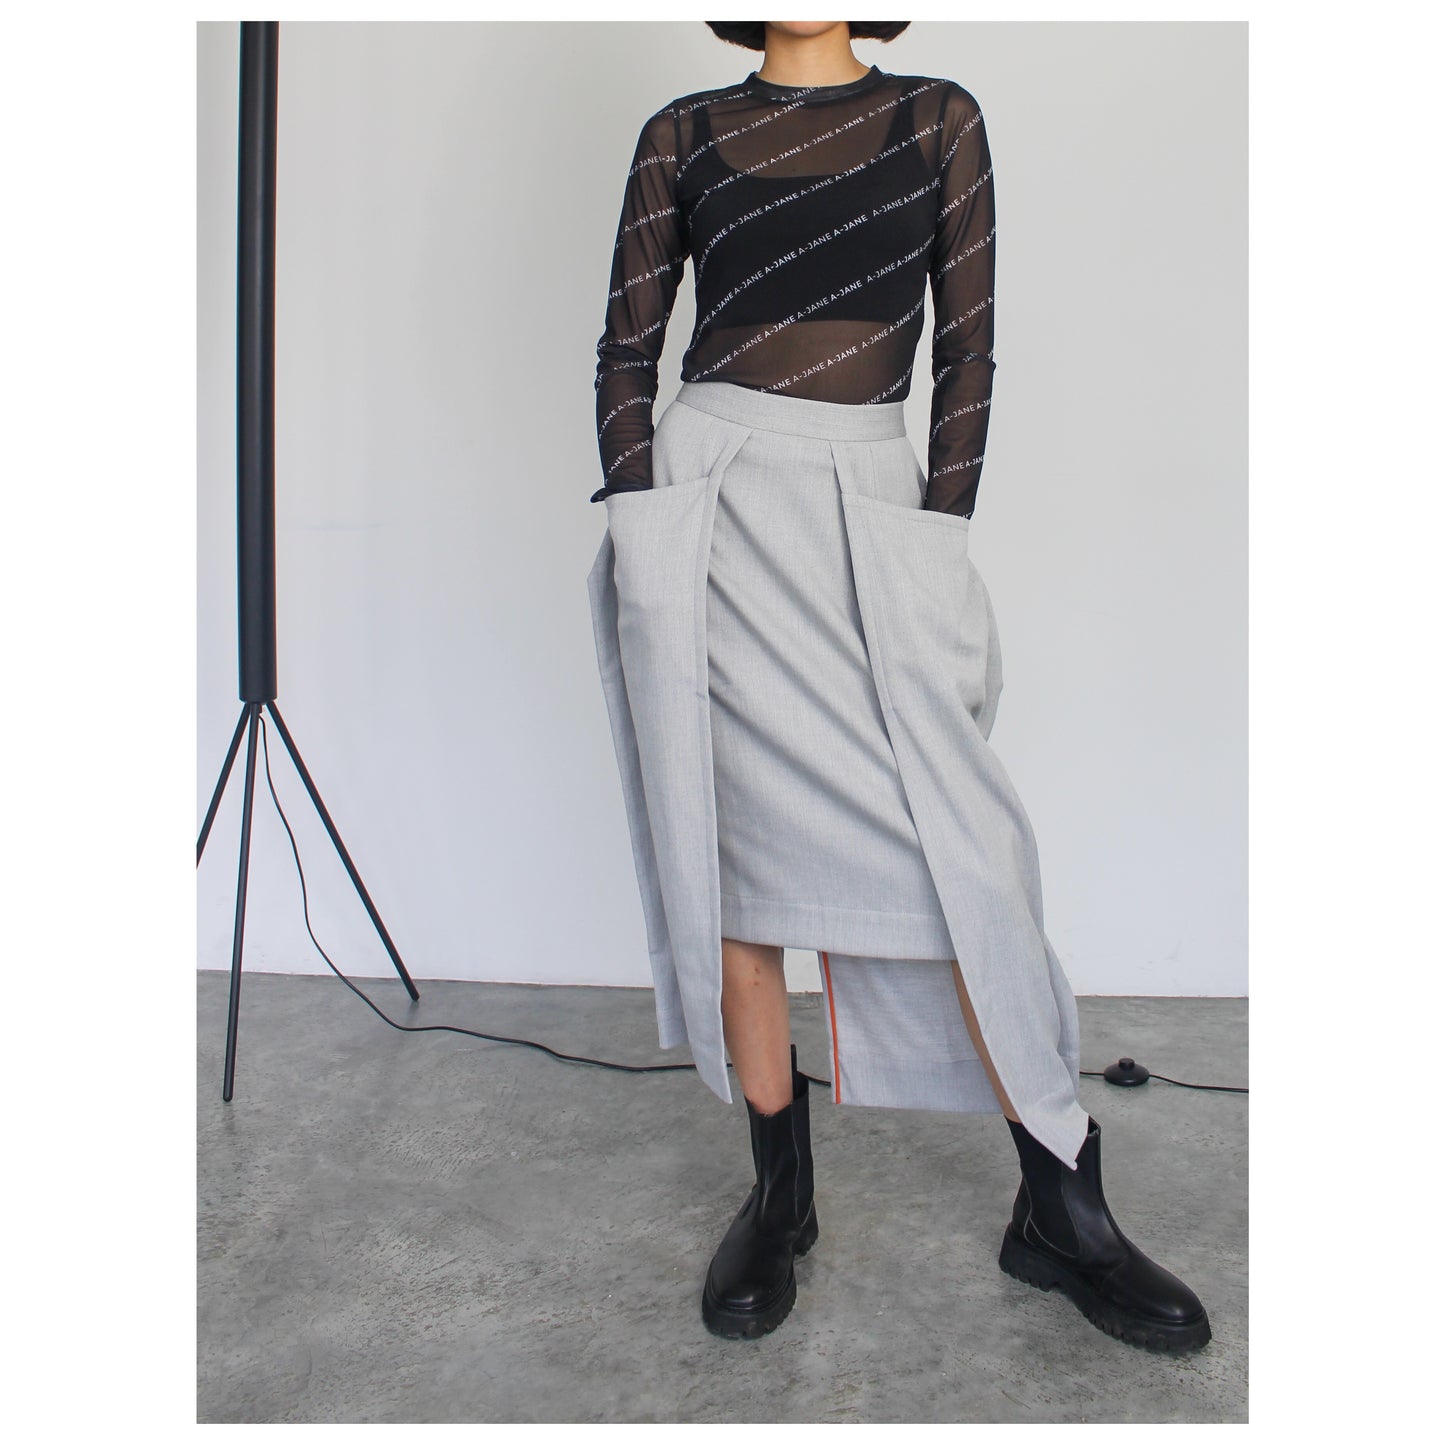 A-JANE Pointed Geometry Skirt